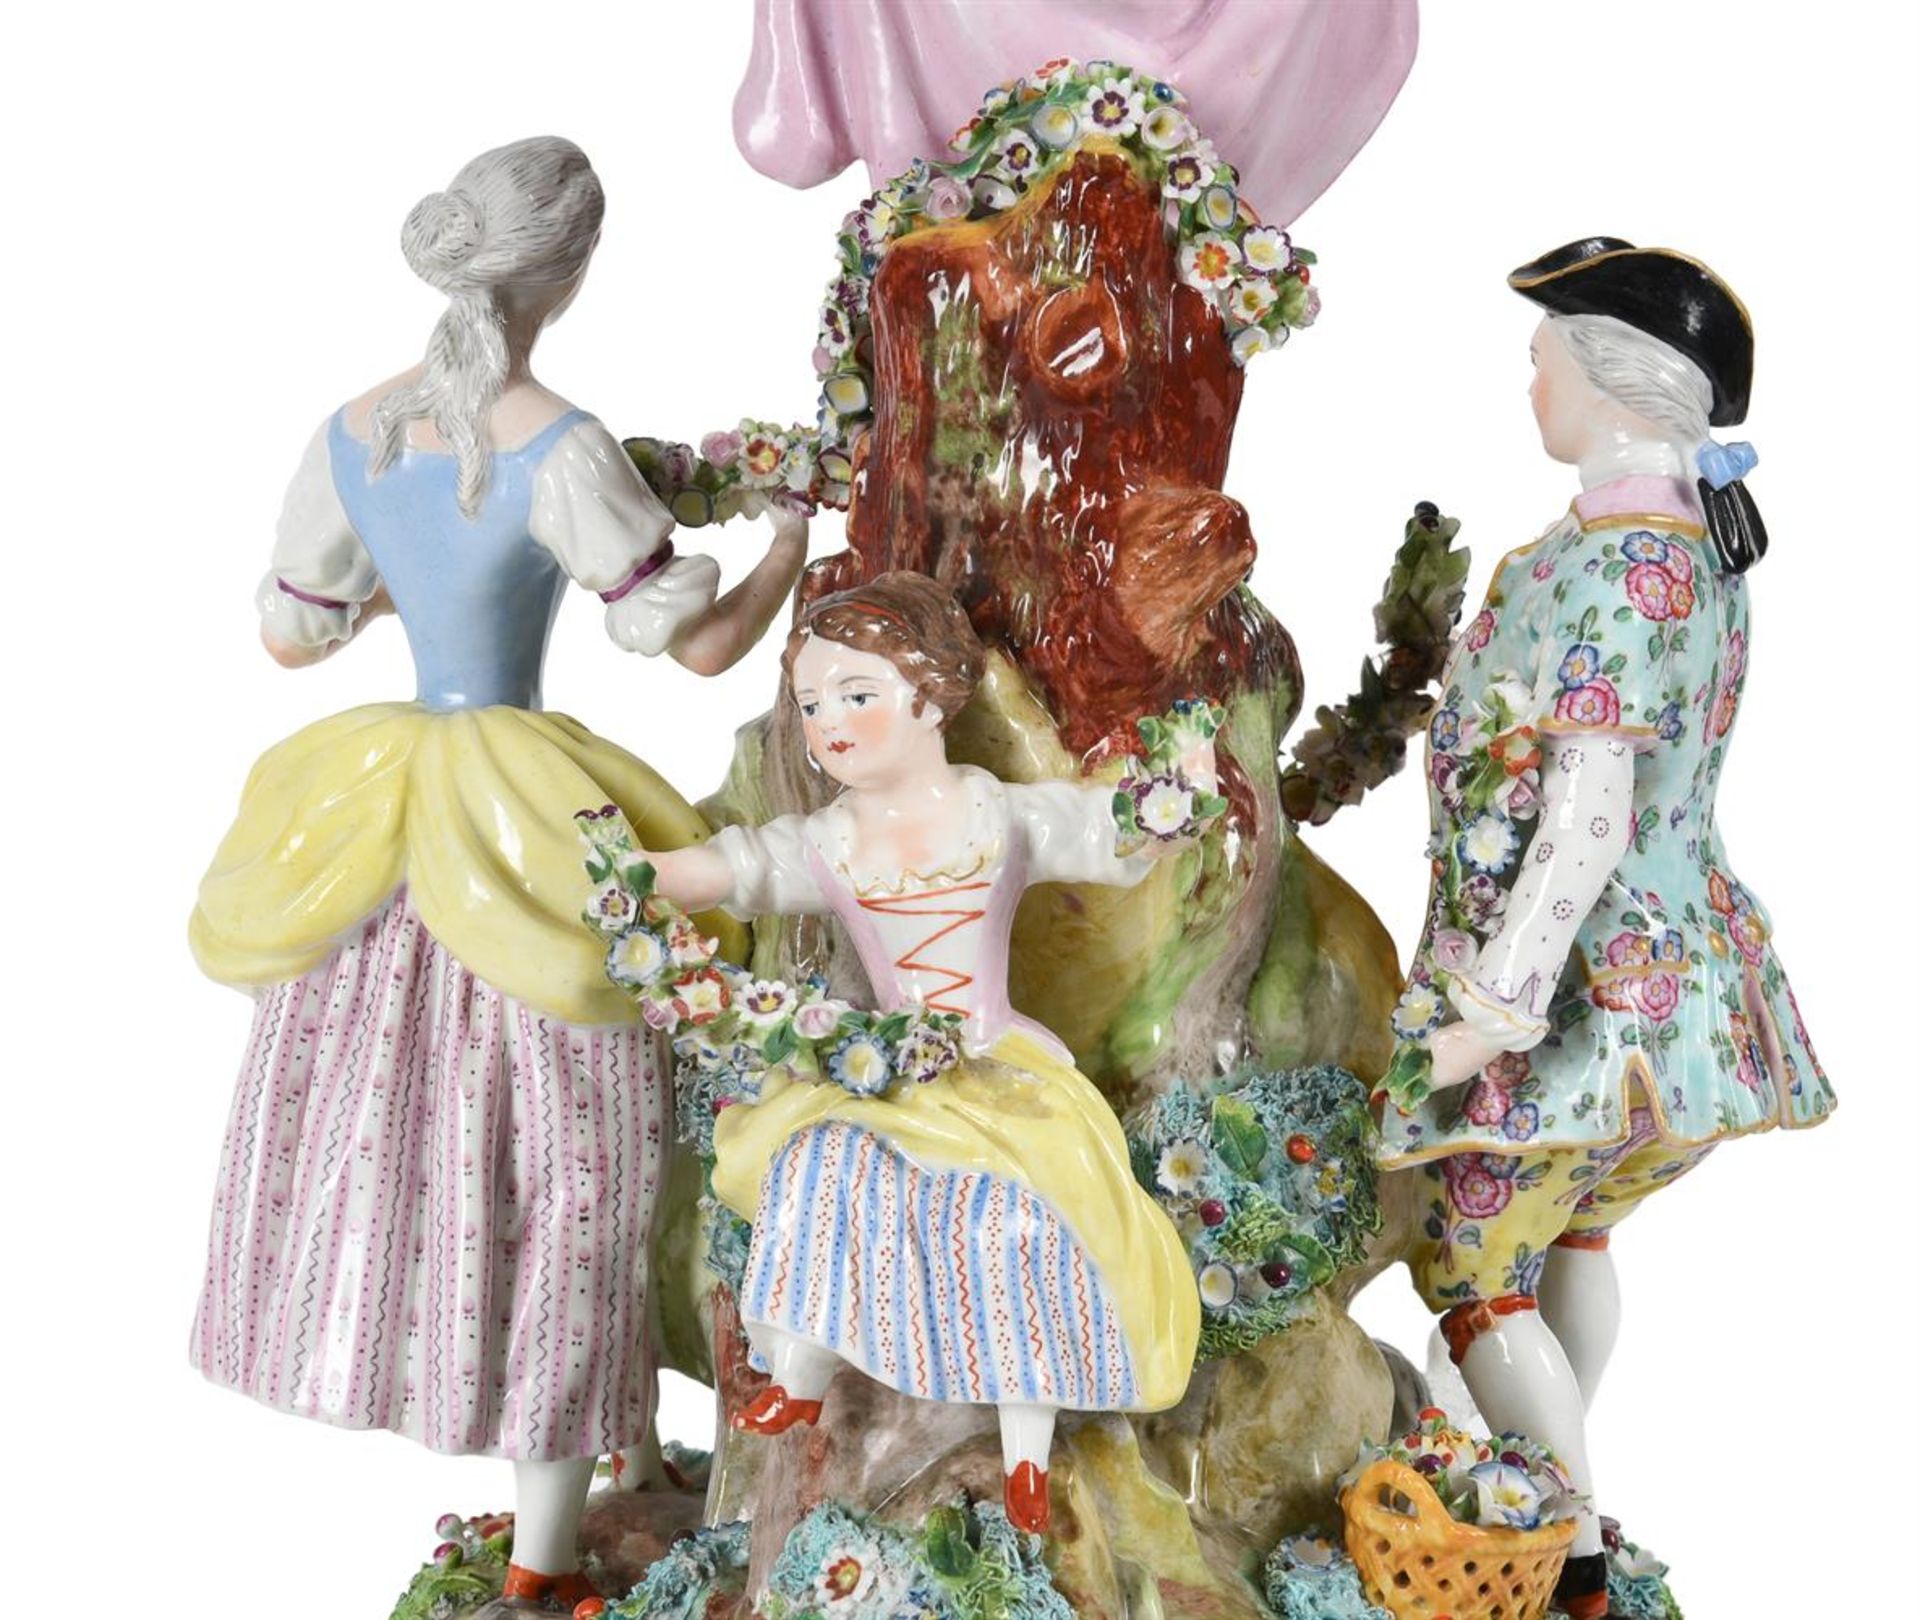 A GERMAN PORCELAIN FIGURAL GROUP IN MEISSEN STYLE, LATE 19TH CENTURY - Image 3 of 4